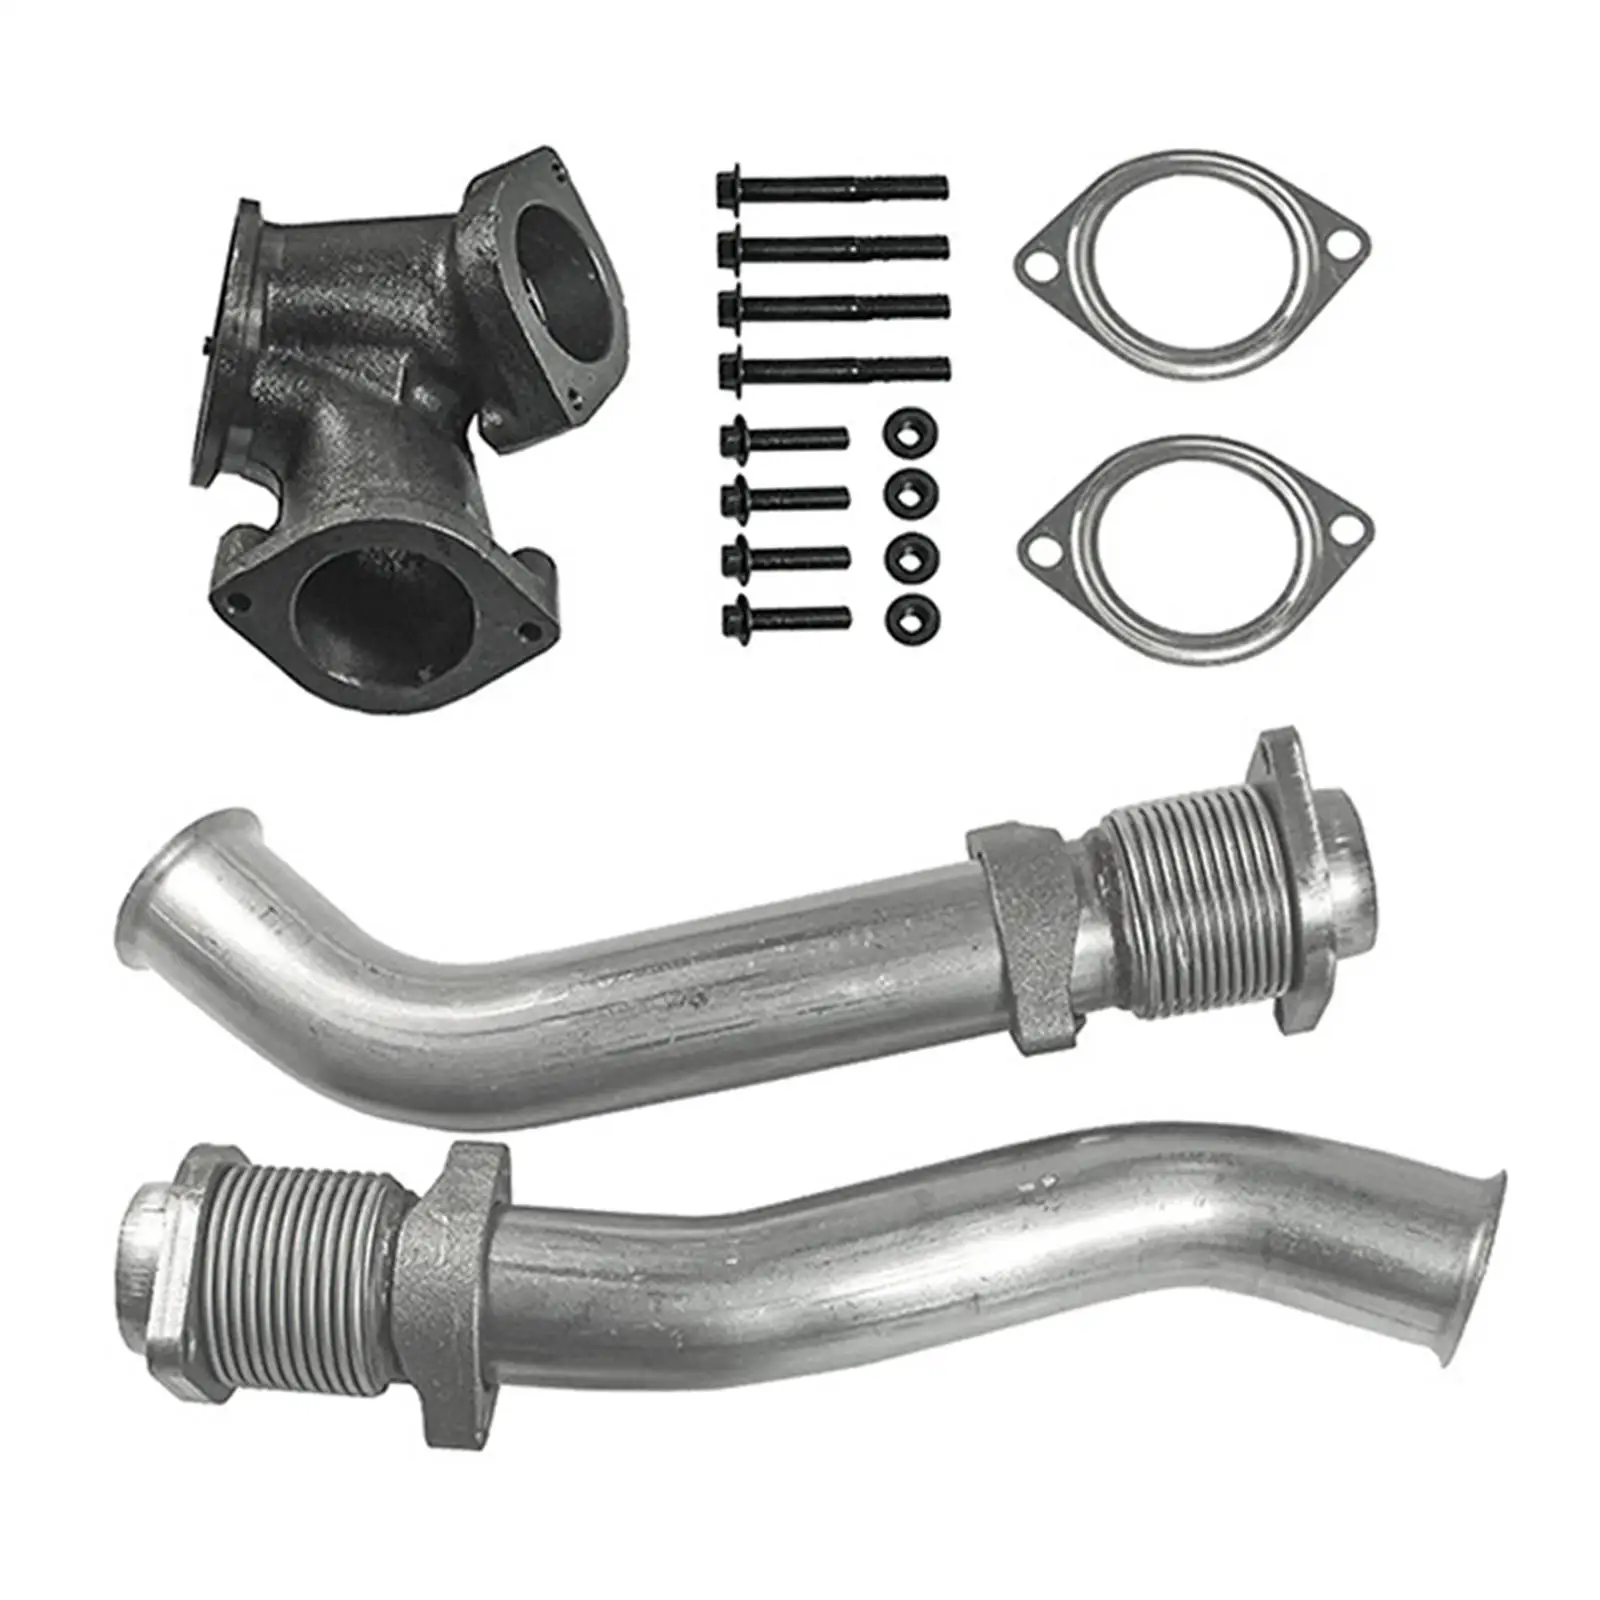 Turbocharger up Pipe Kit 679-005 Replacement Parts Diesel Turbine Pipe Kit for